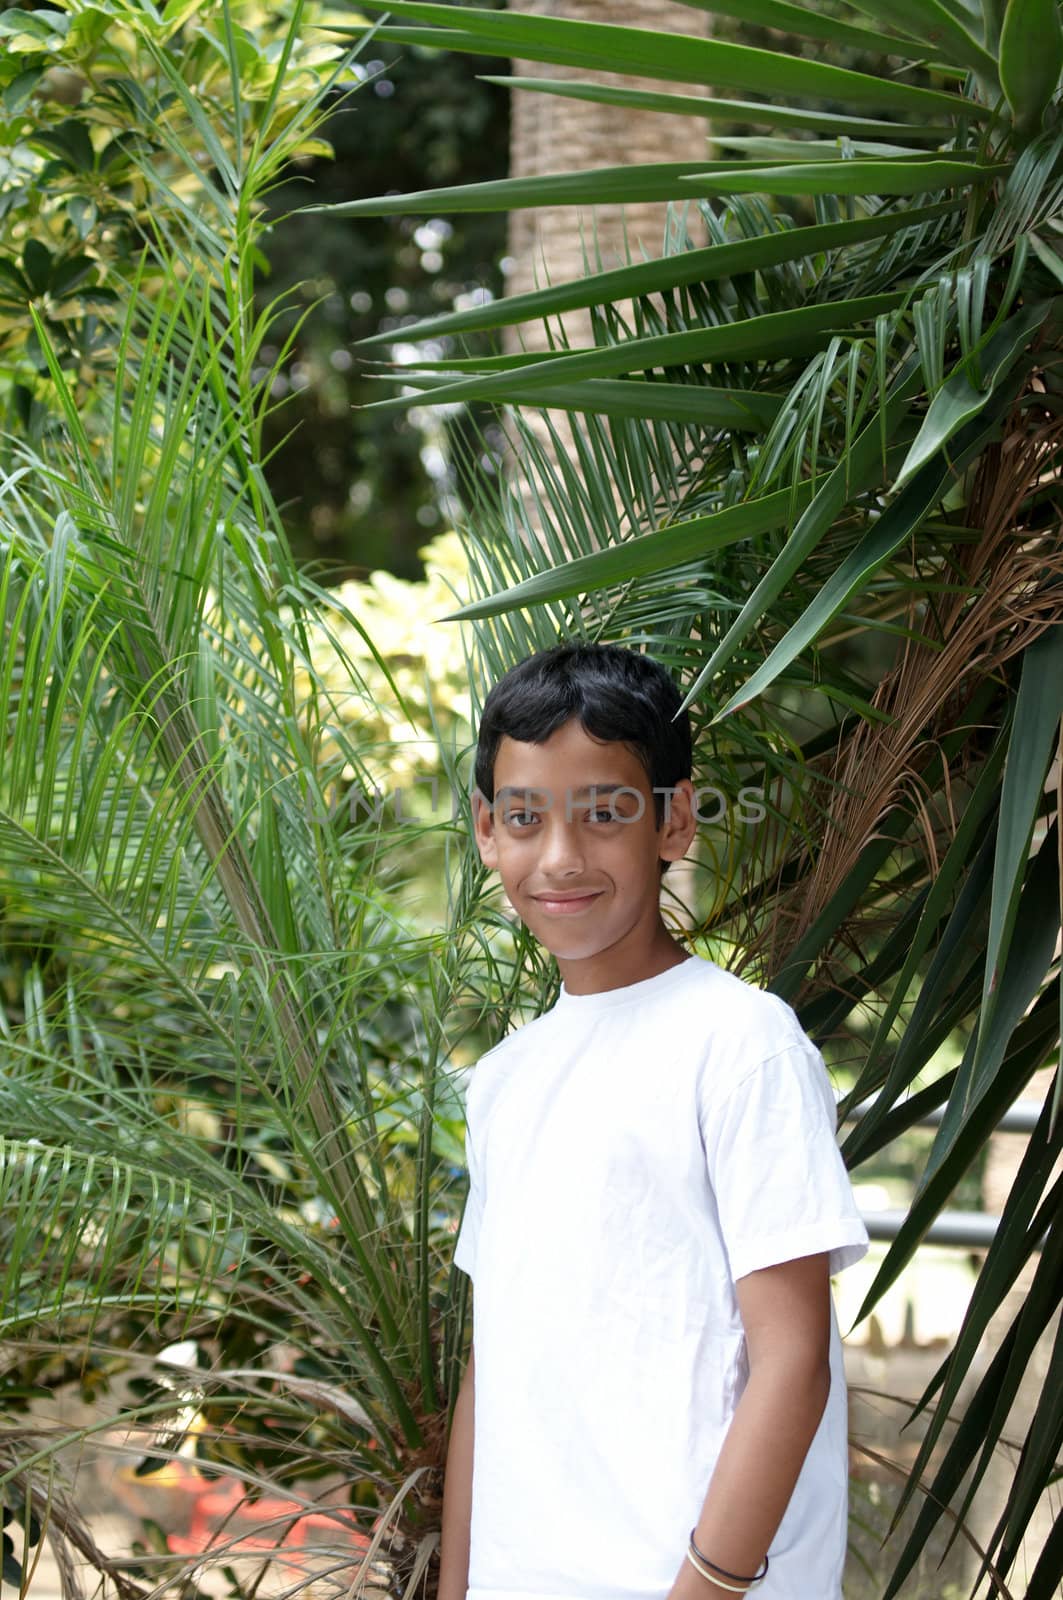 Portrait of a smiling boy in the background of tropical plants.